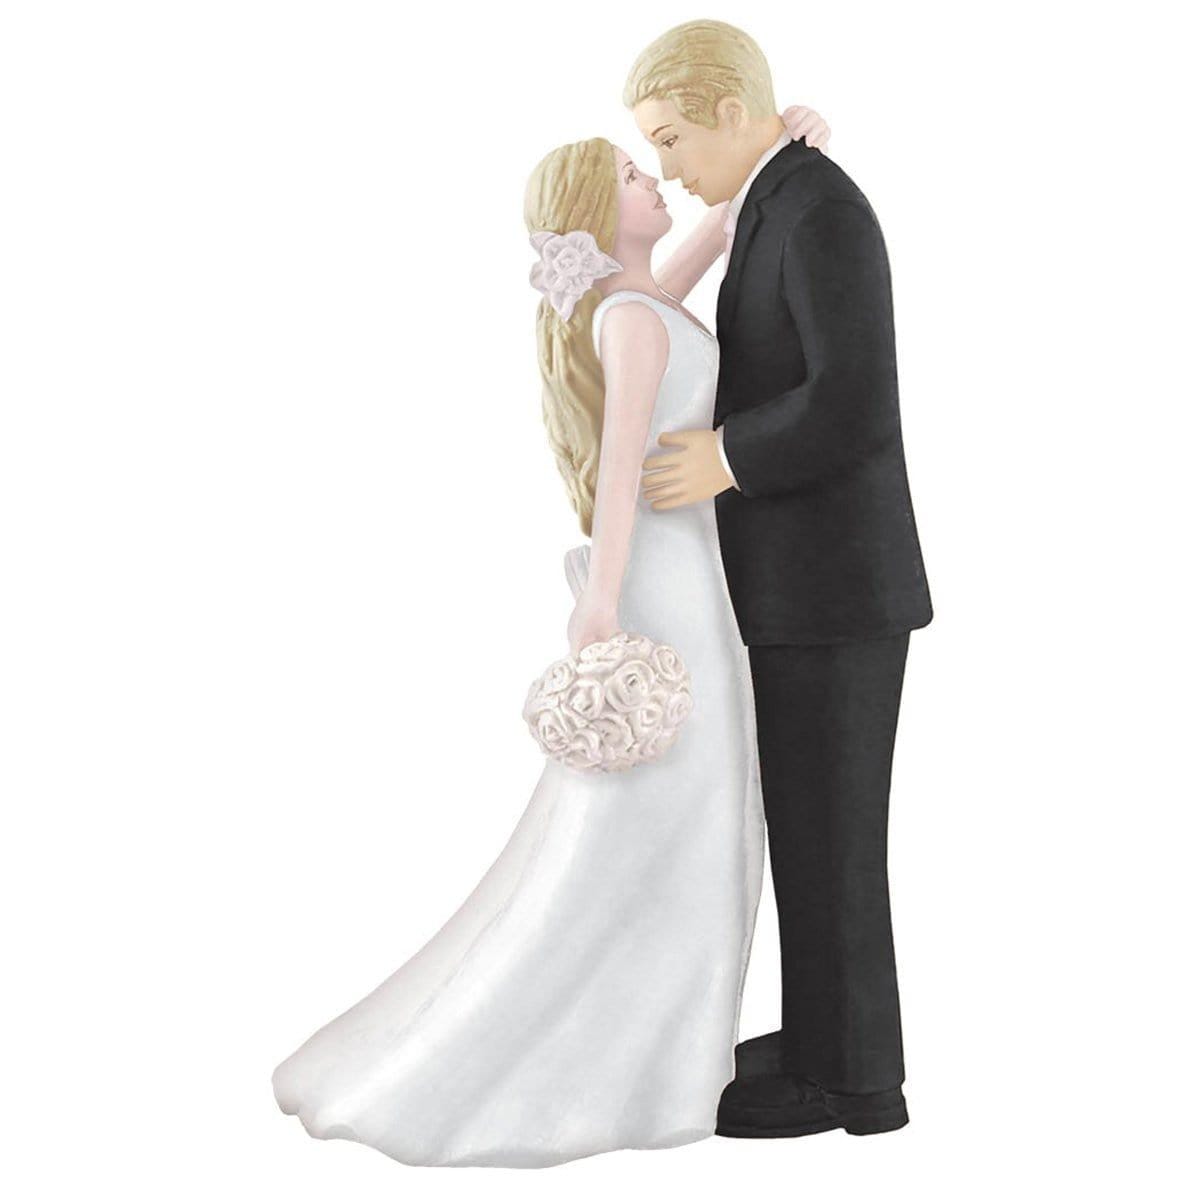 Buy Wedding Cake Topper - Bride & Groom Bouquet 4.19 Po sold at Party Expert